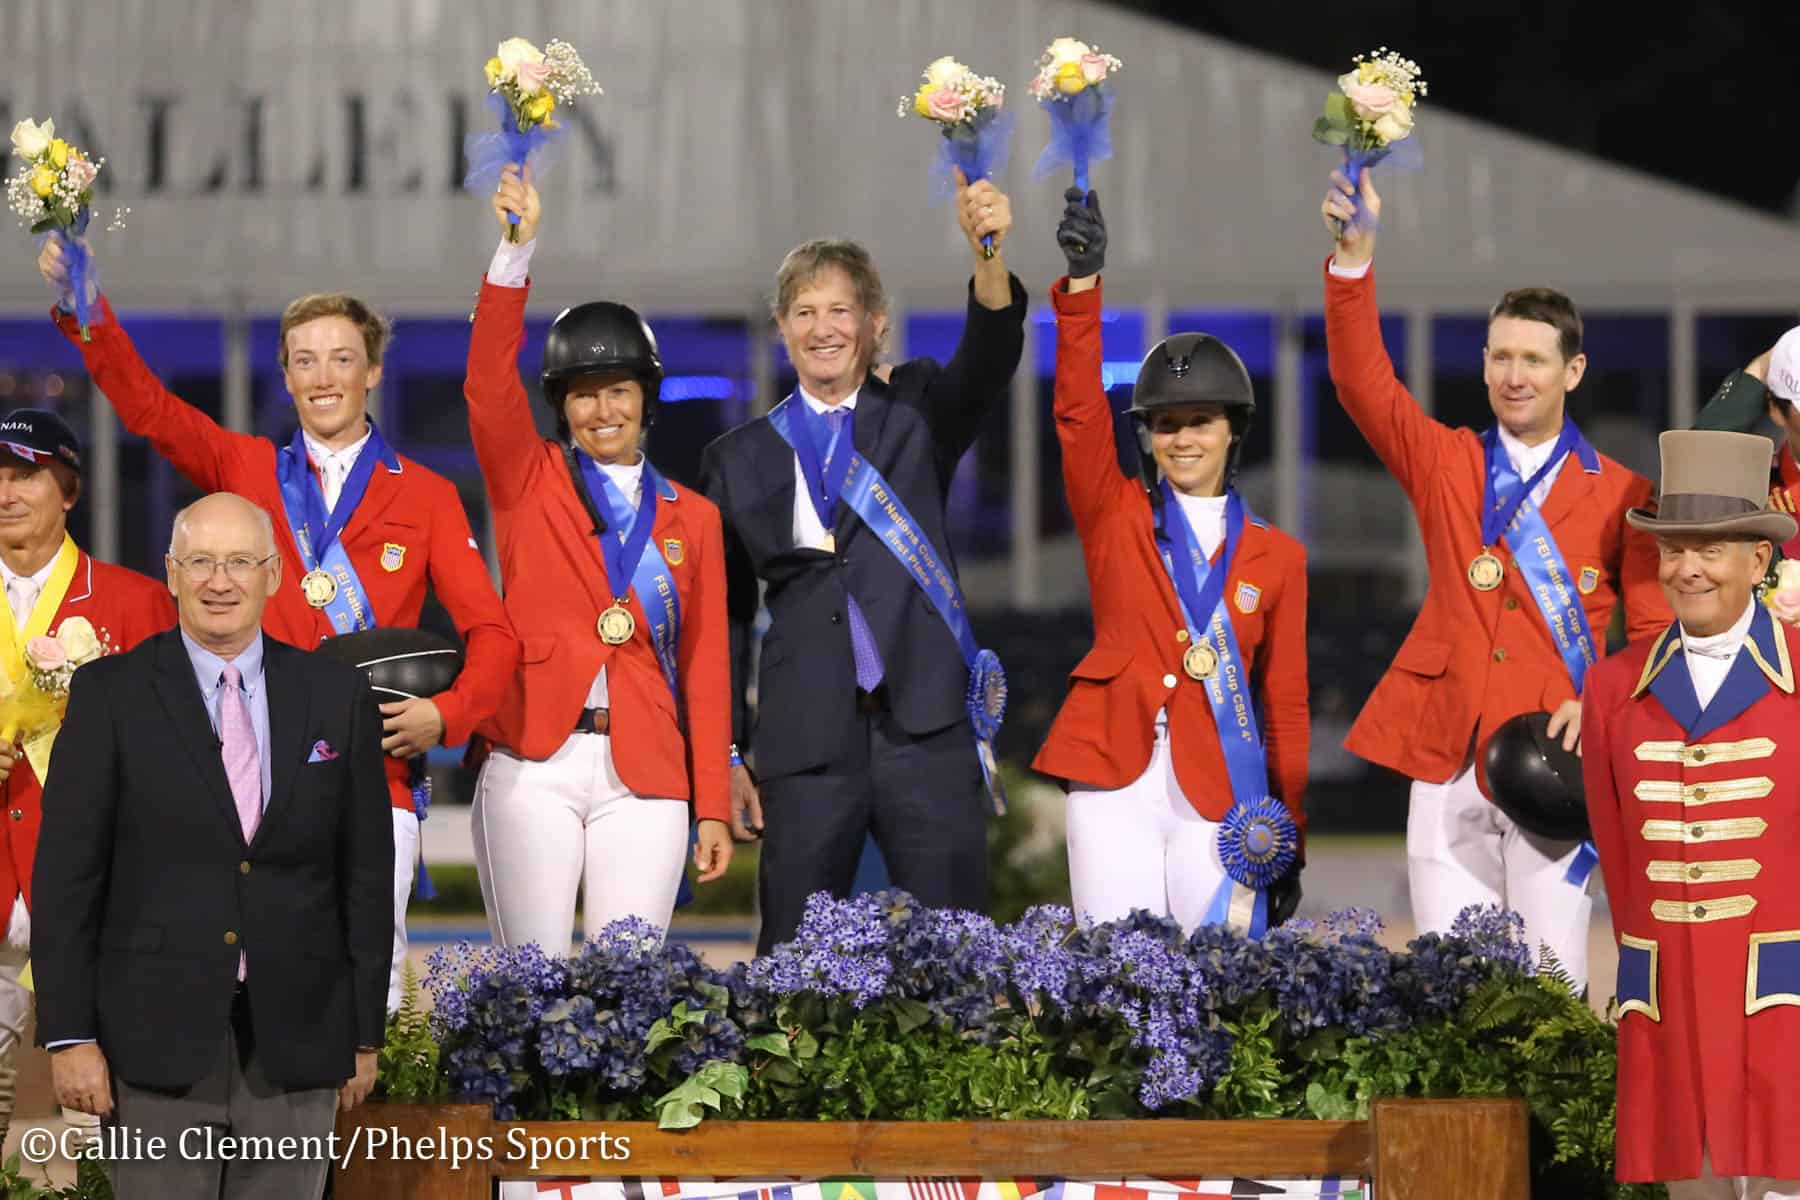 Left to right on the podium: Wilton Porter, Beezie Madden, Chef d’Équipe Robert Ridland, Adrienne Sternlicht and McLain Ward of the United States won the $150,000 FEI Nations Cup CSIO4* at the 2019 Winter Equestrian Festival in Wellington, Florida.